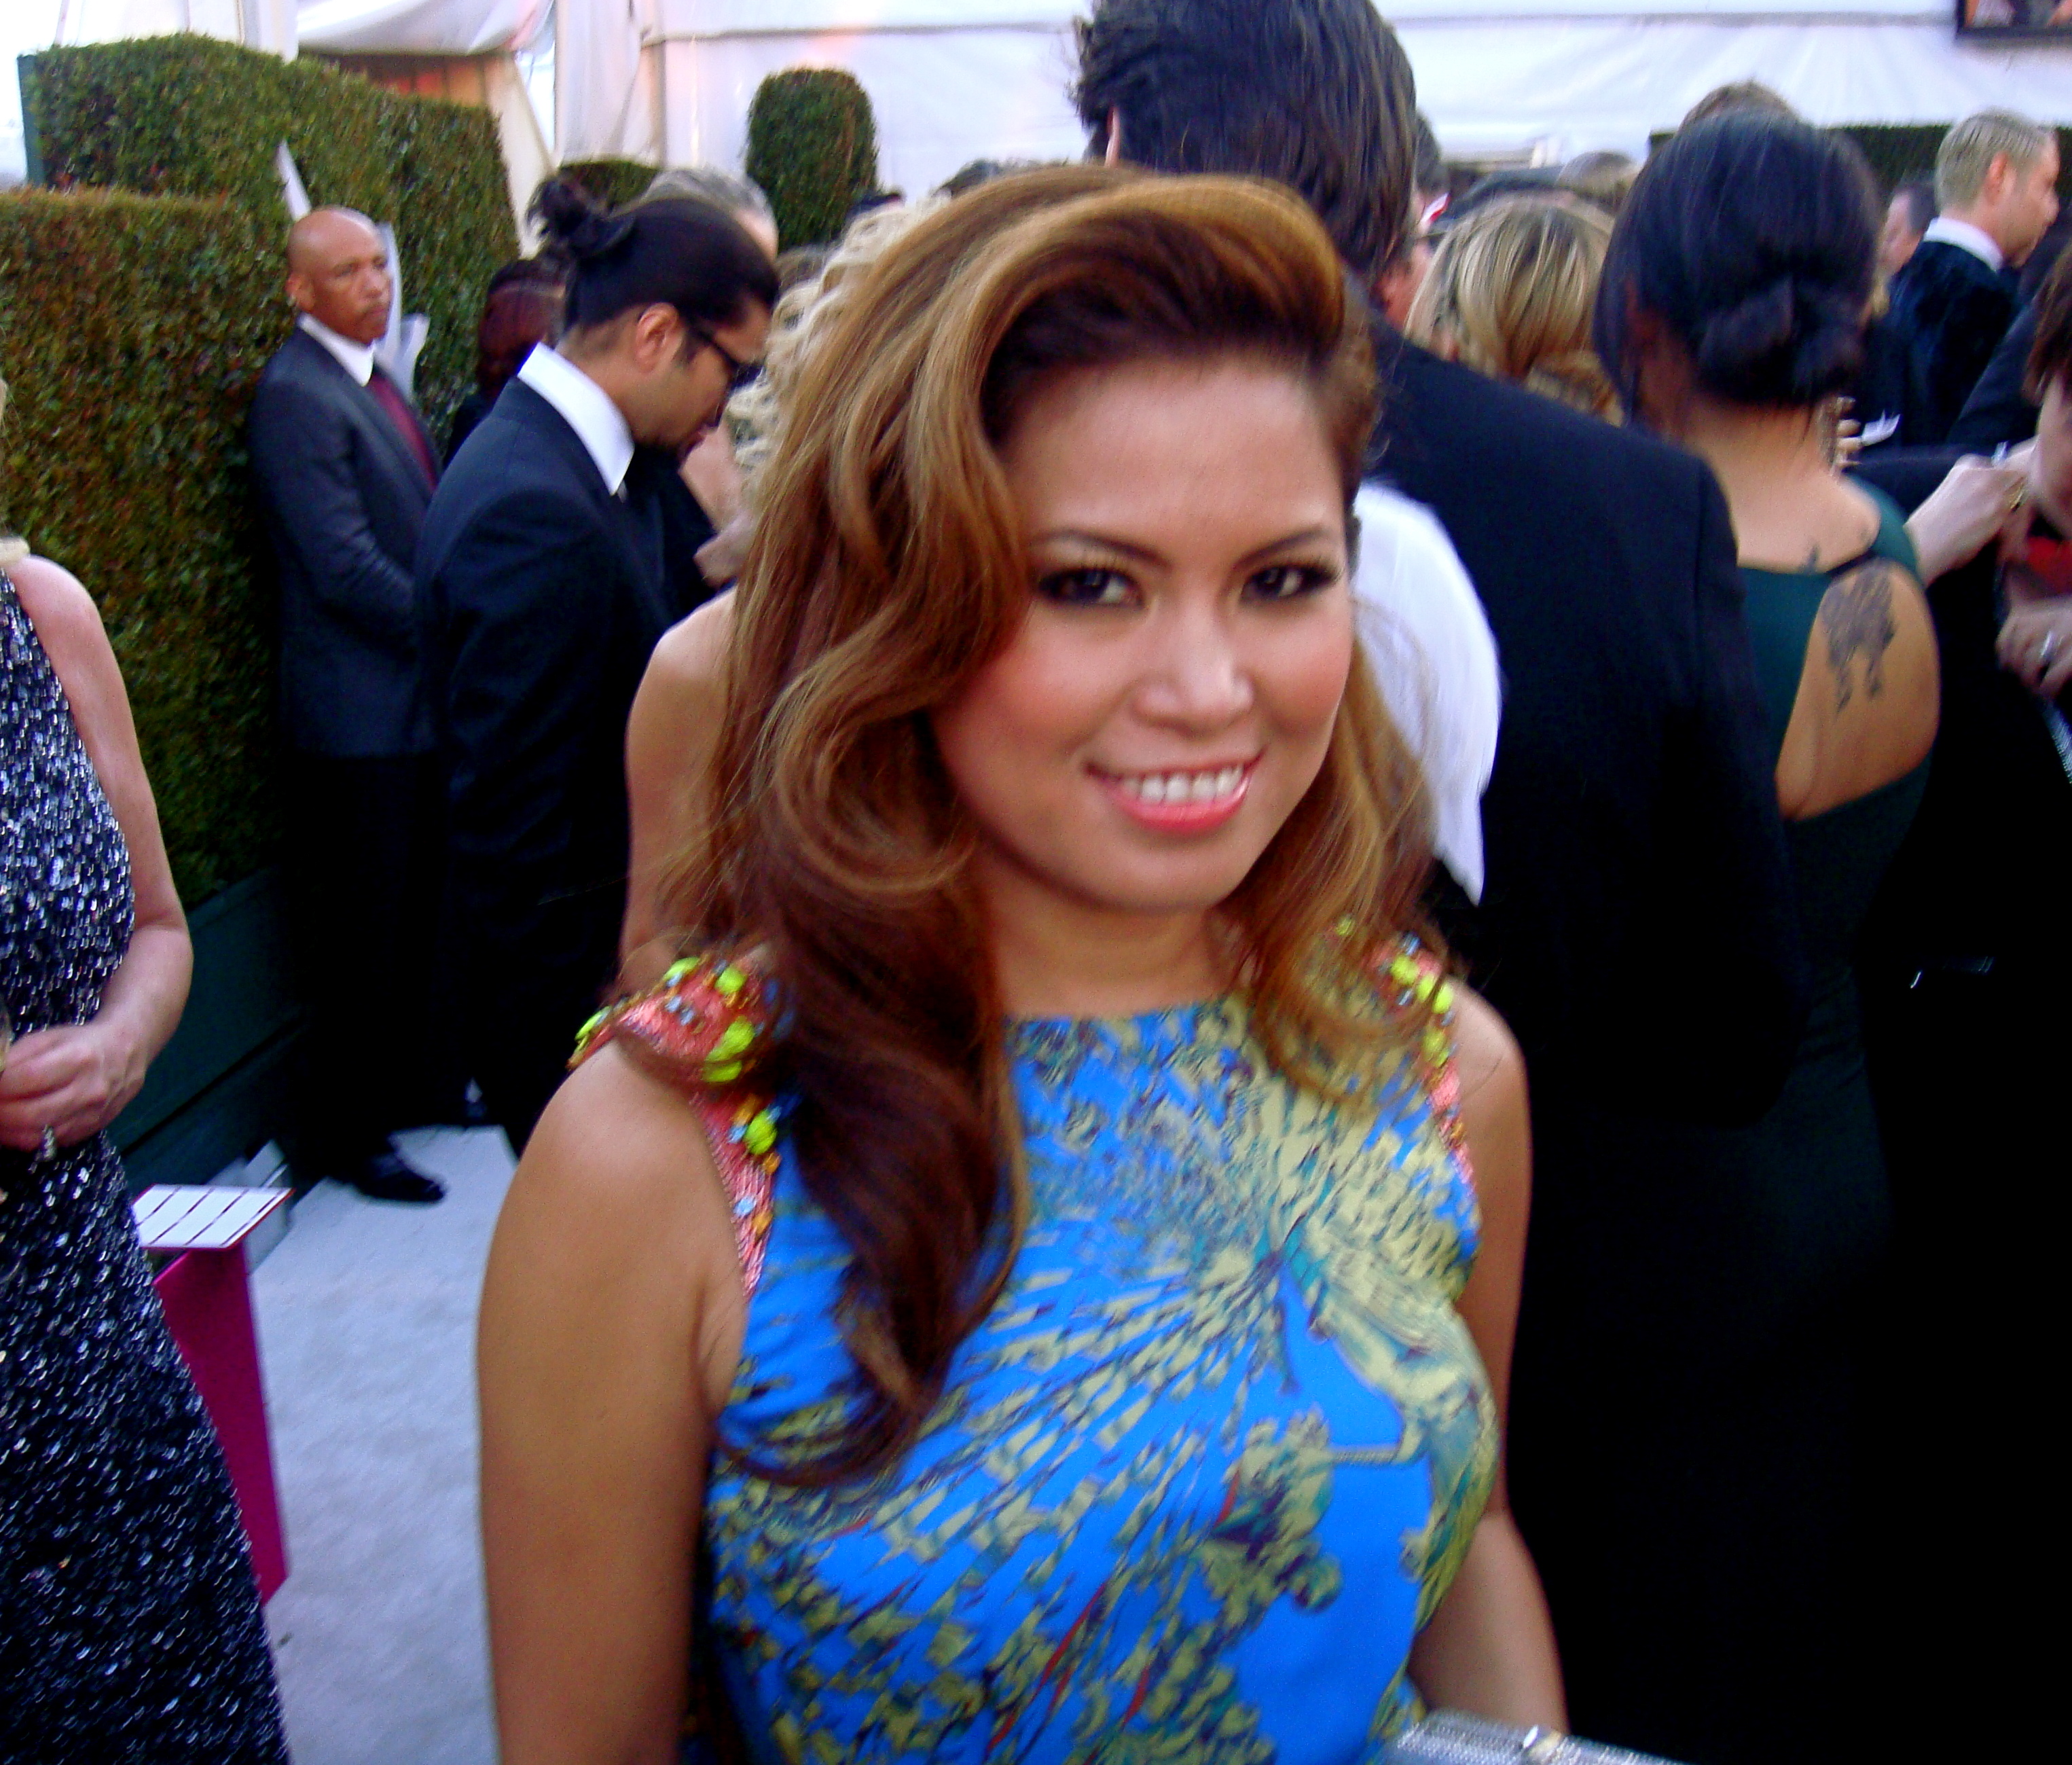 Zarah at the 2013 Elton John Oscar Viewing Cocktail Reception in West Hollywood, CA.